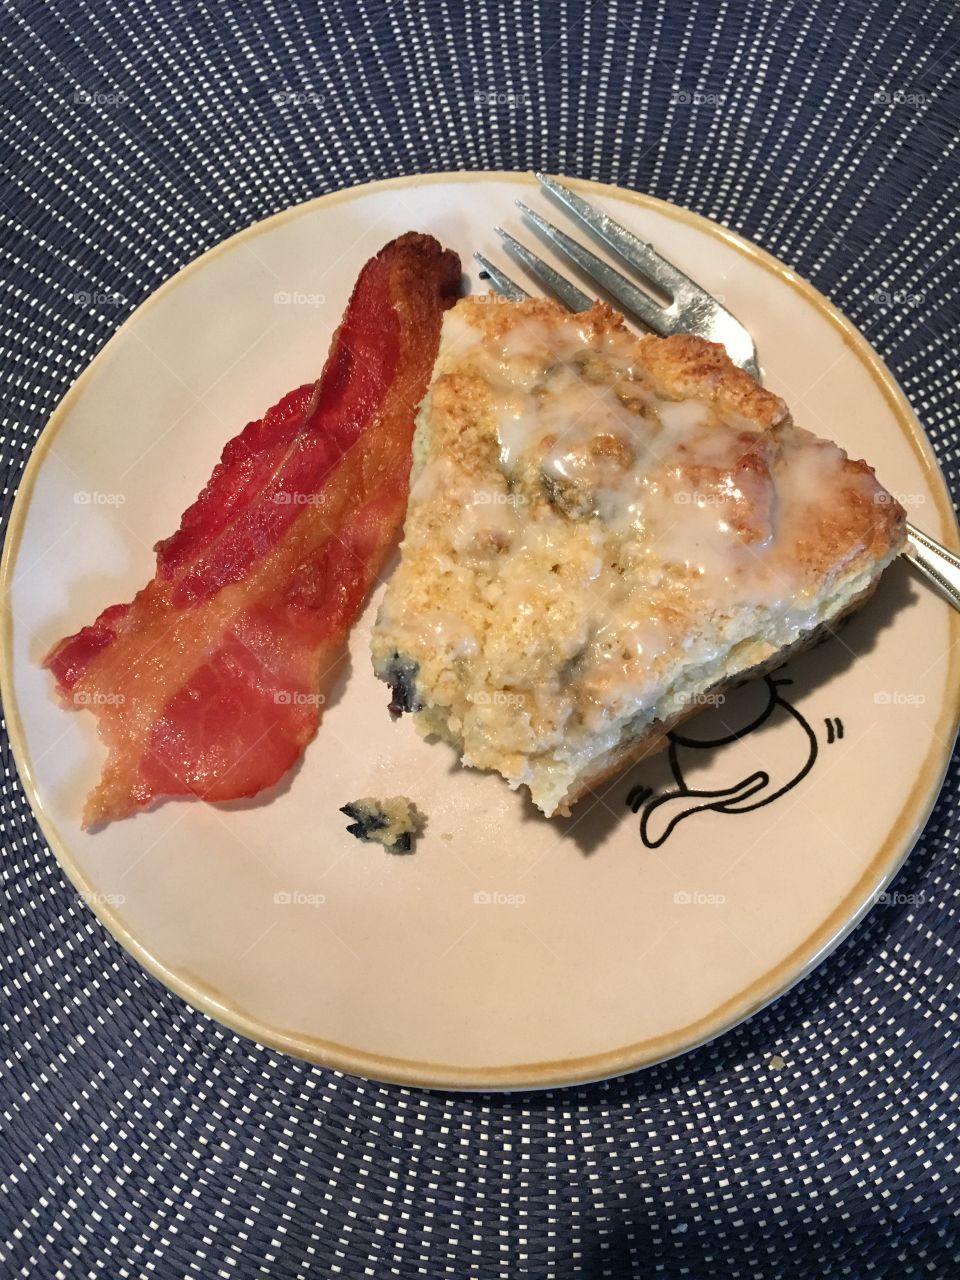 Scone and Bacon